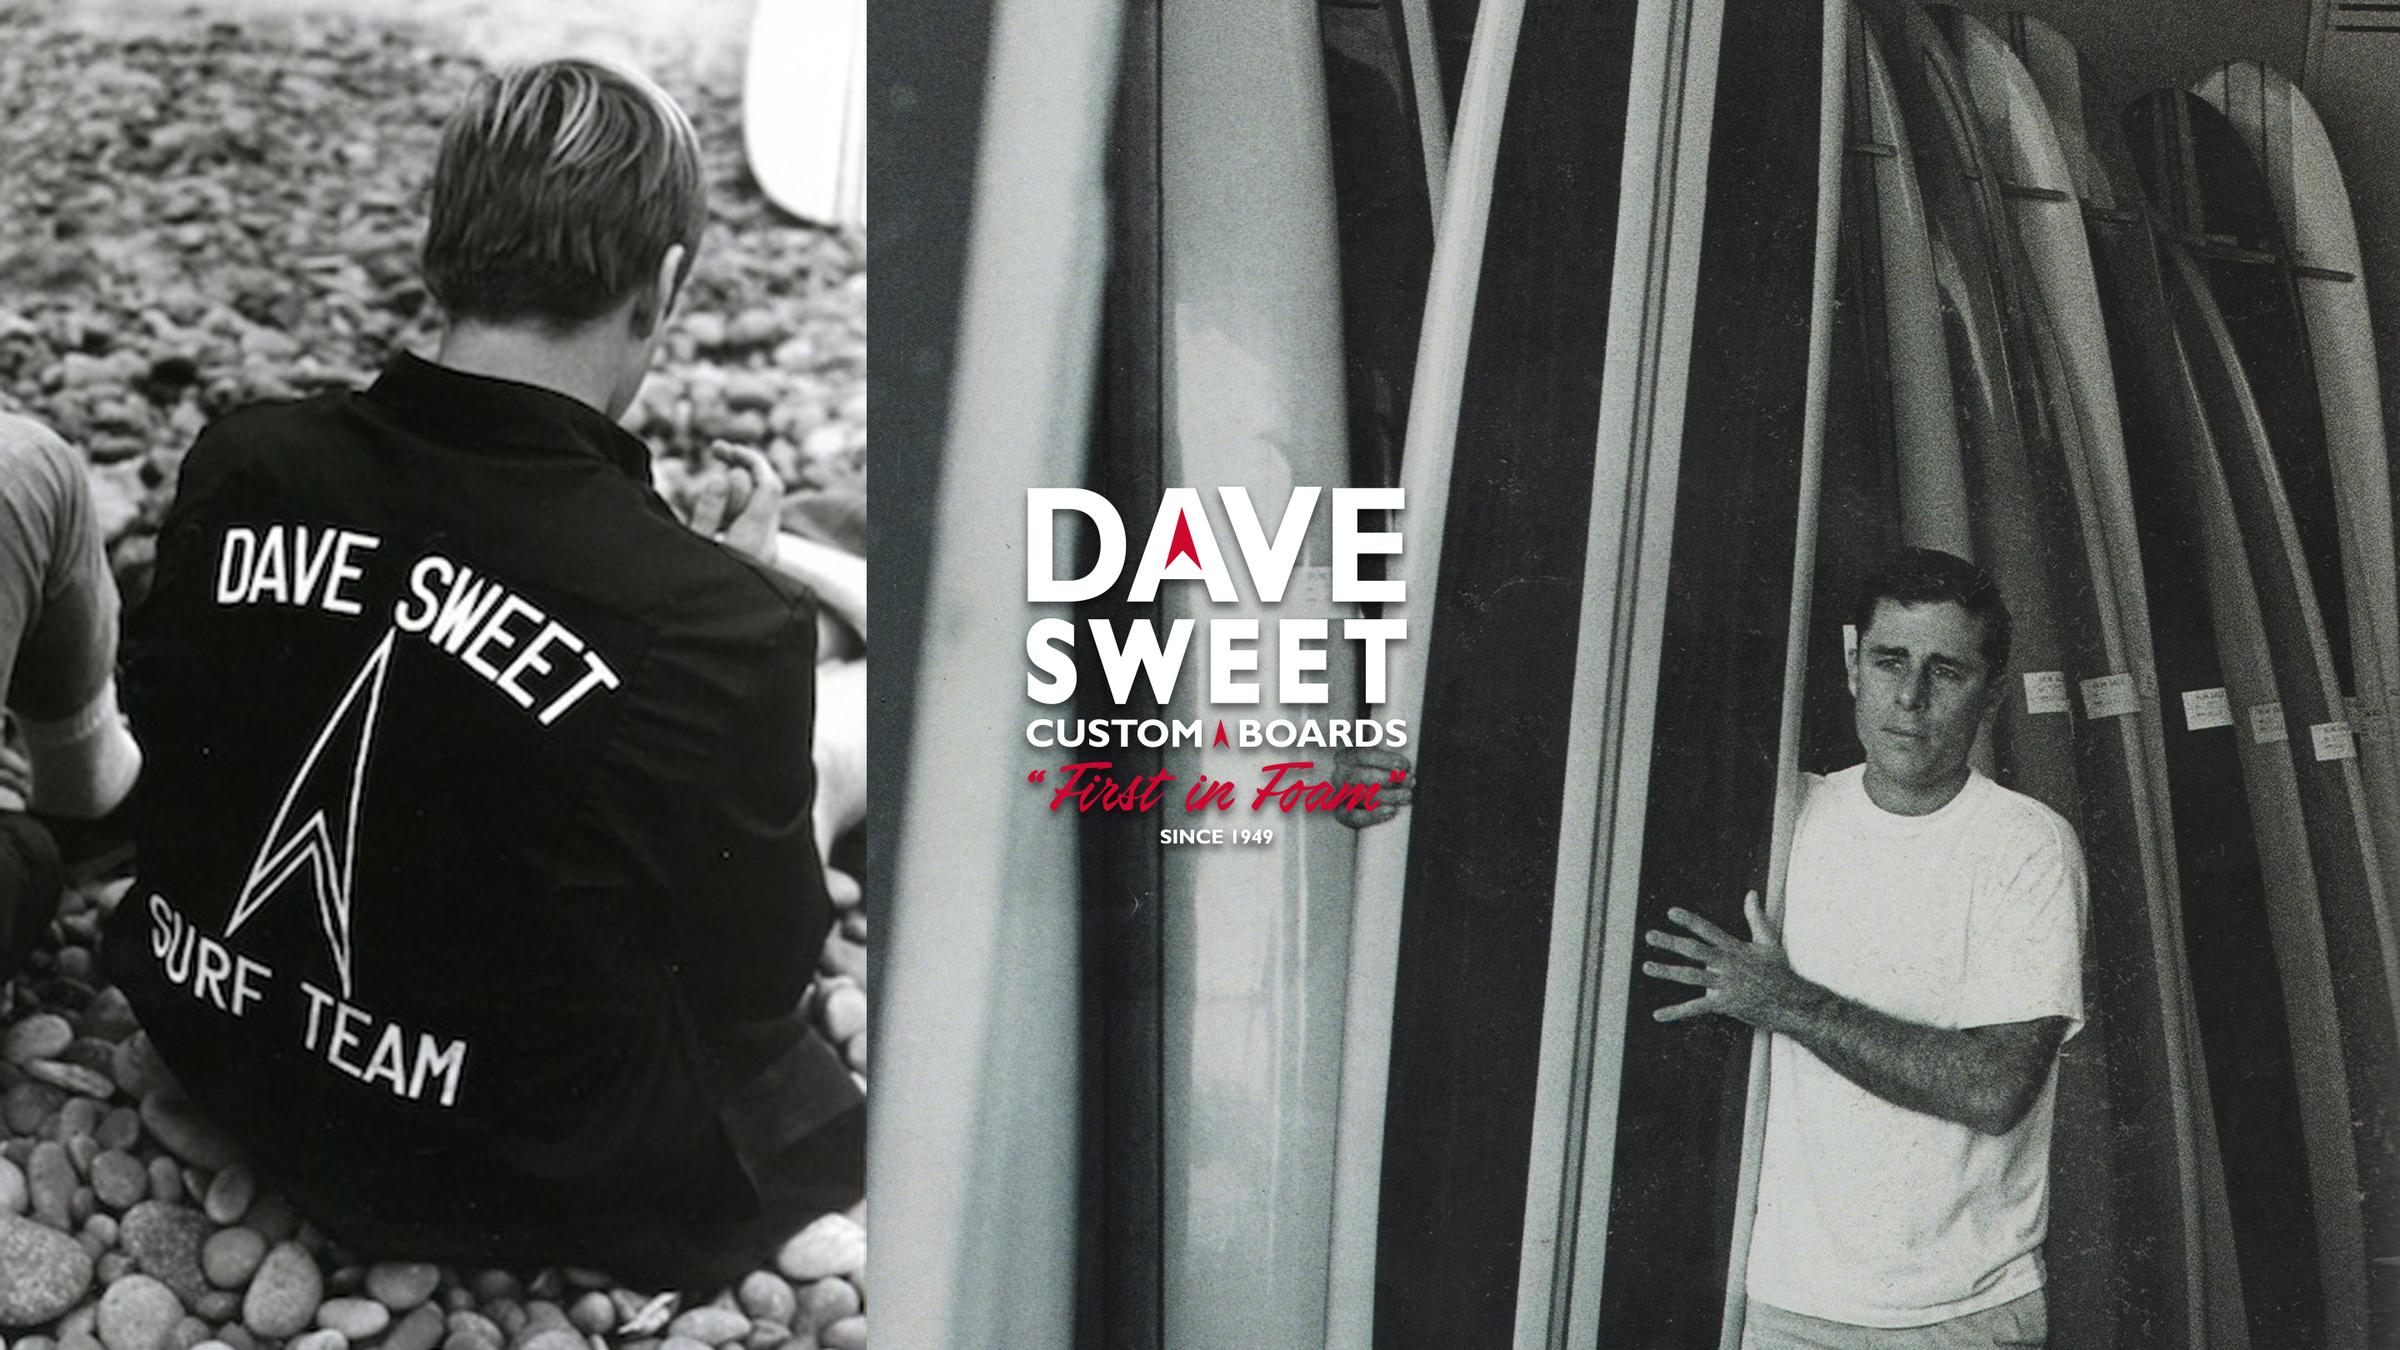 Dave Sweet Surfboards